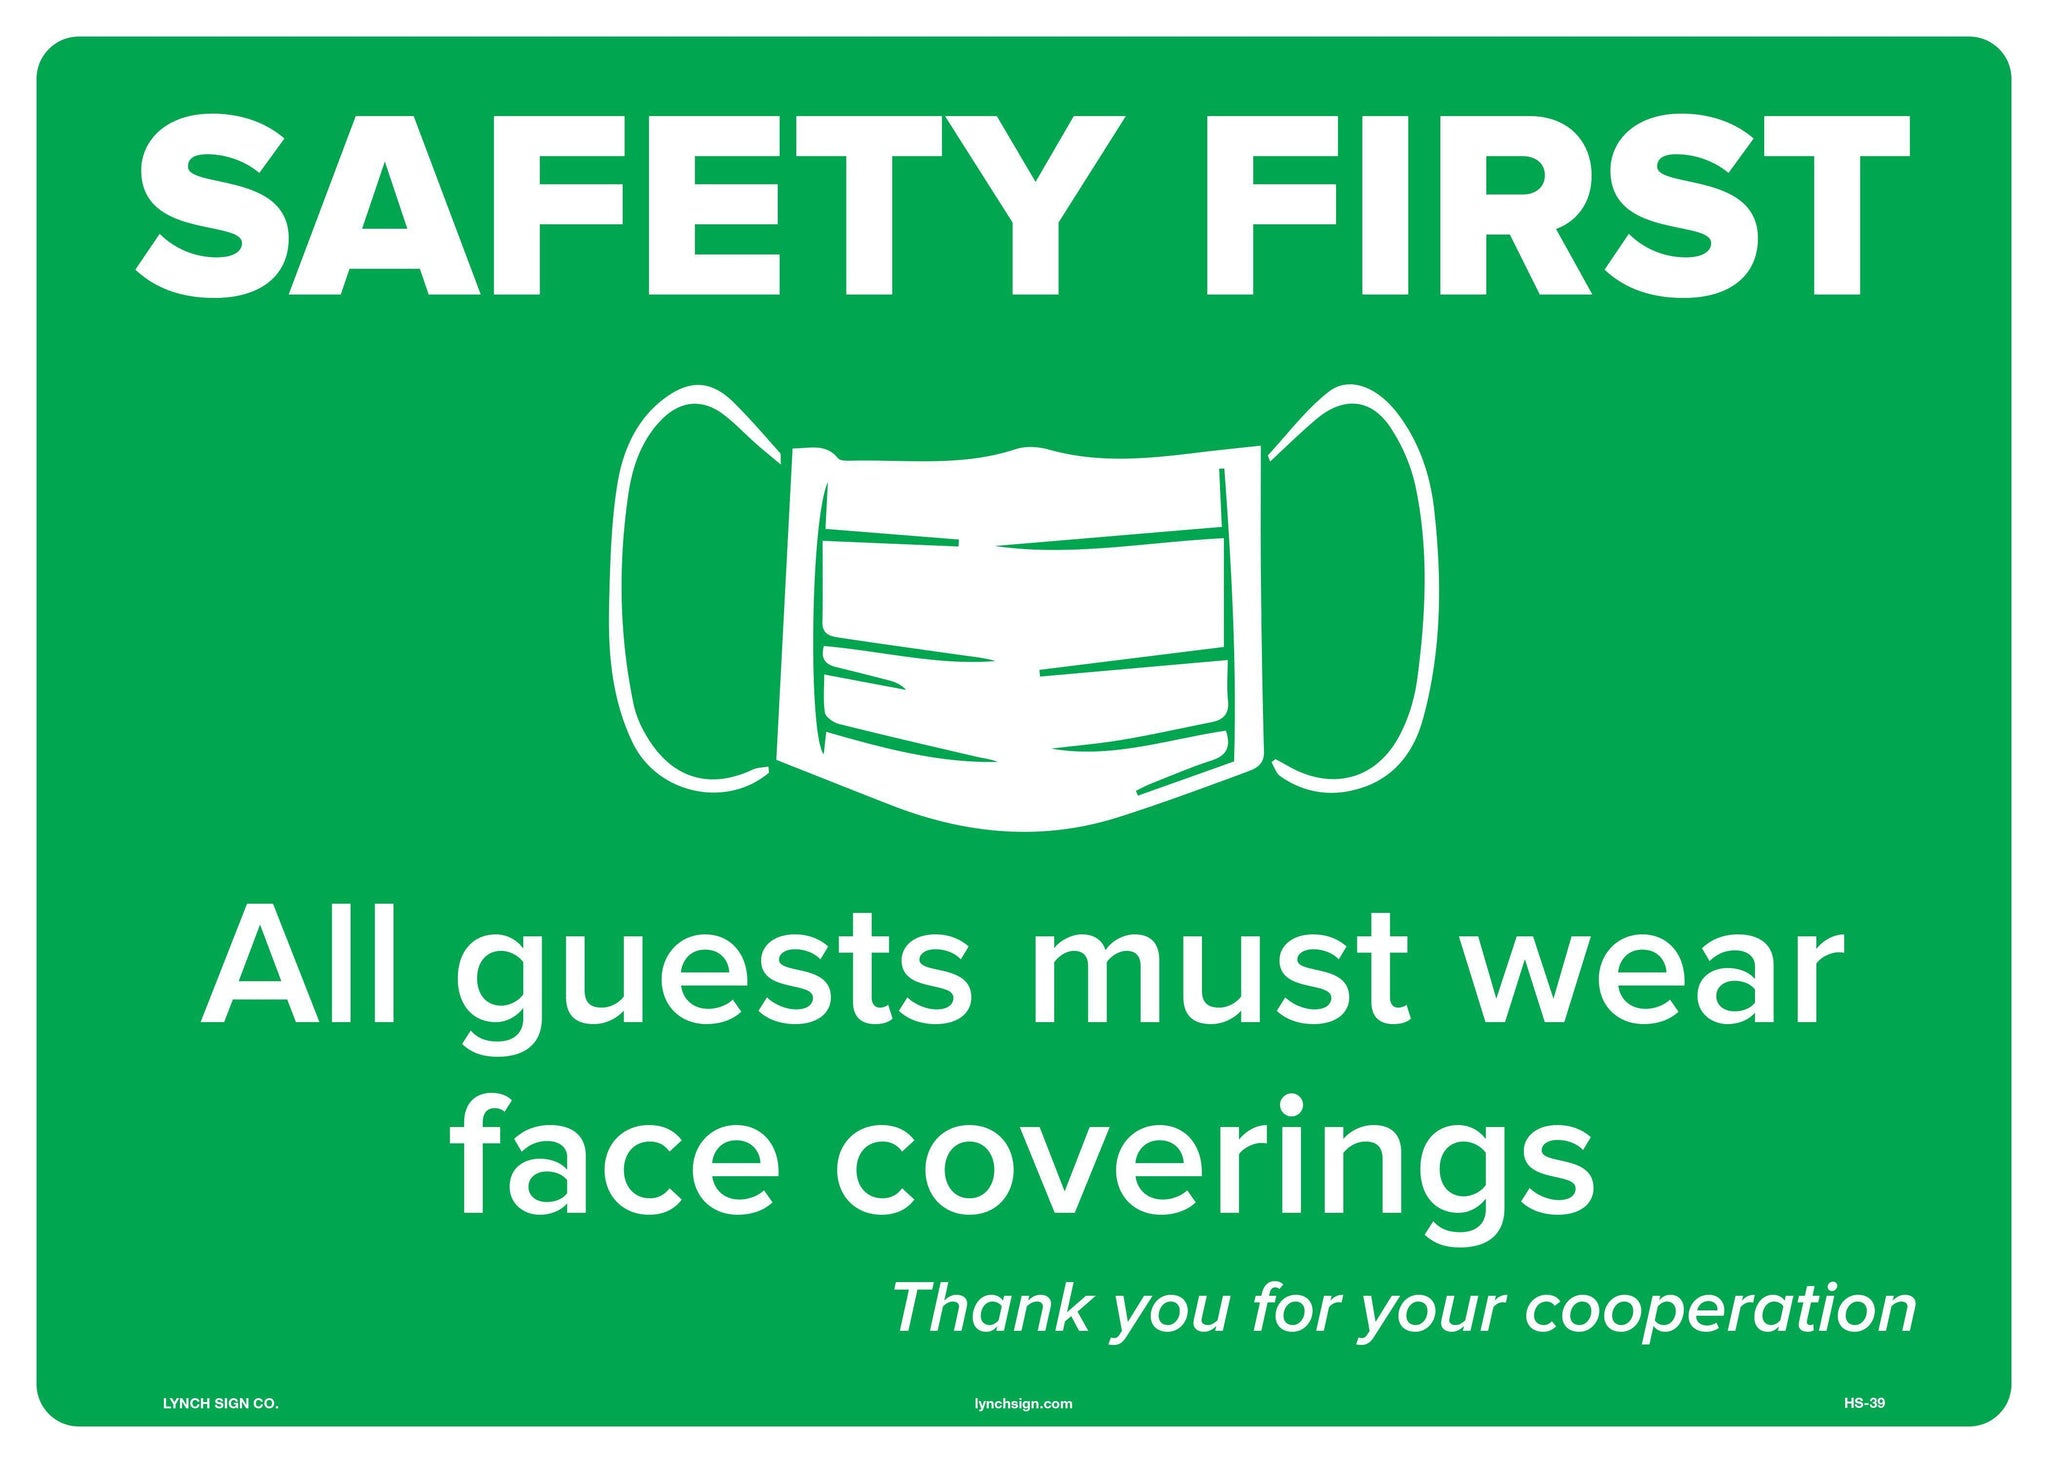 Lynch HS-39 Safety First Sign "All guest must wear face coverings" 14" x 20"